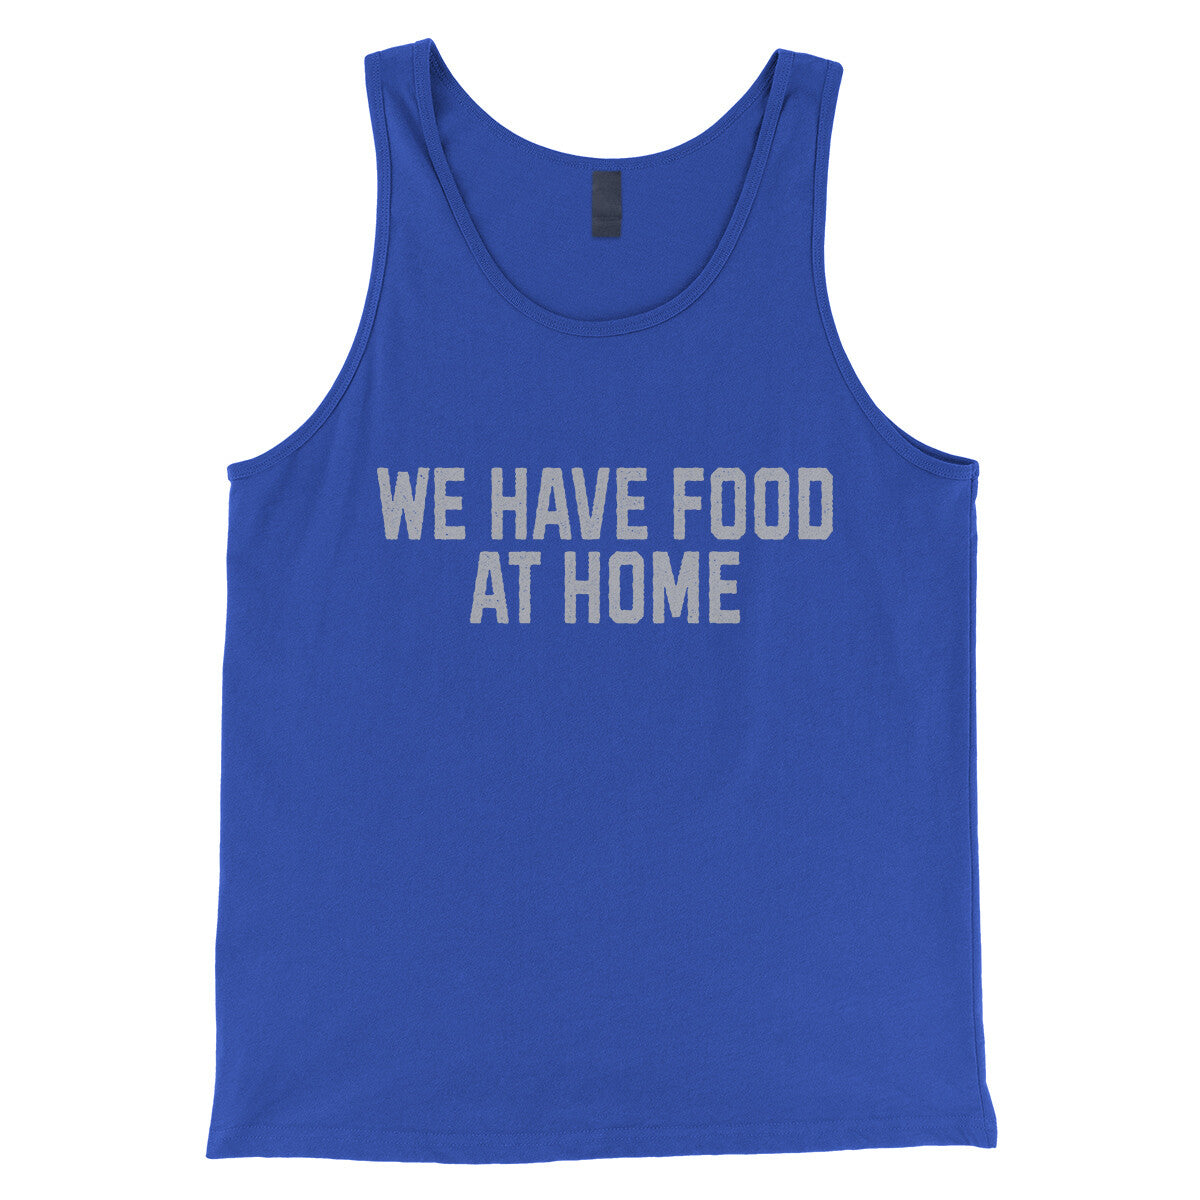 We Have Food at Home in True Royal Color